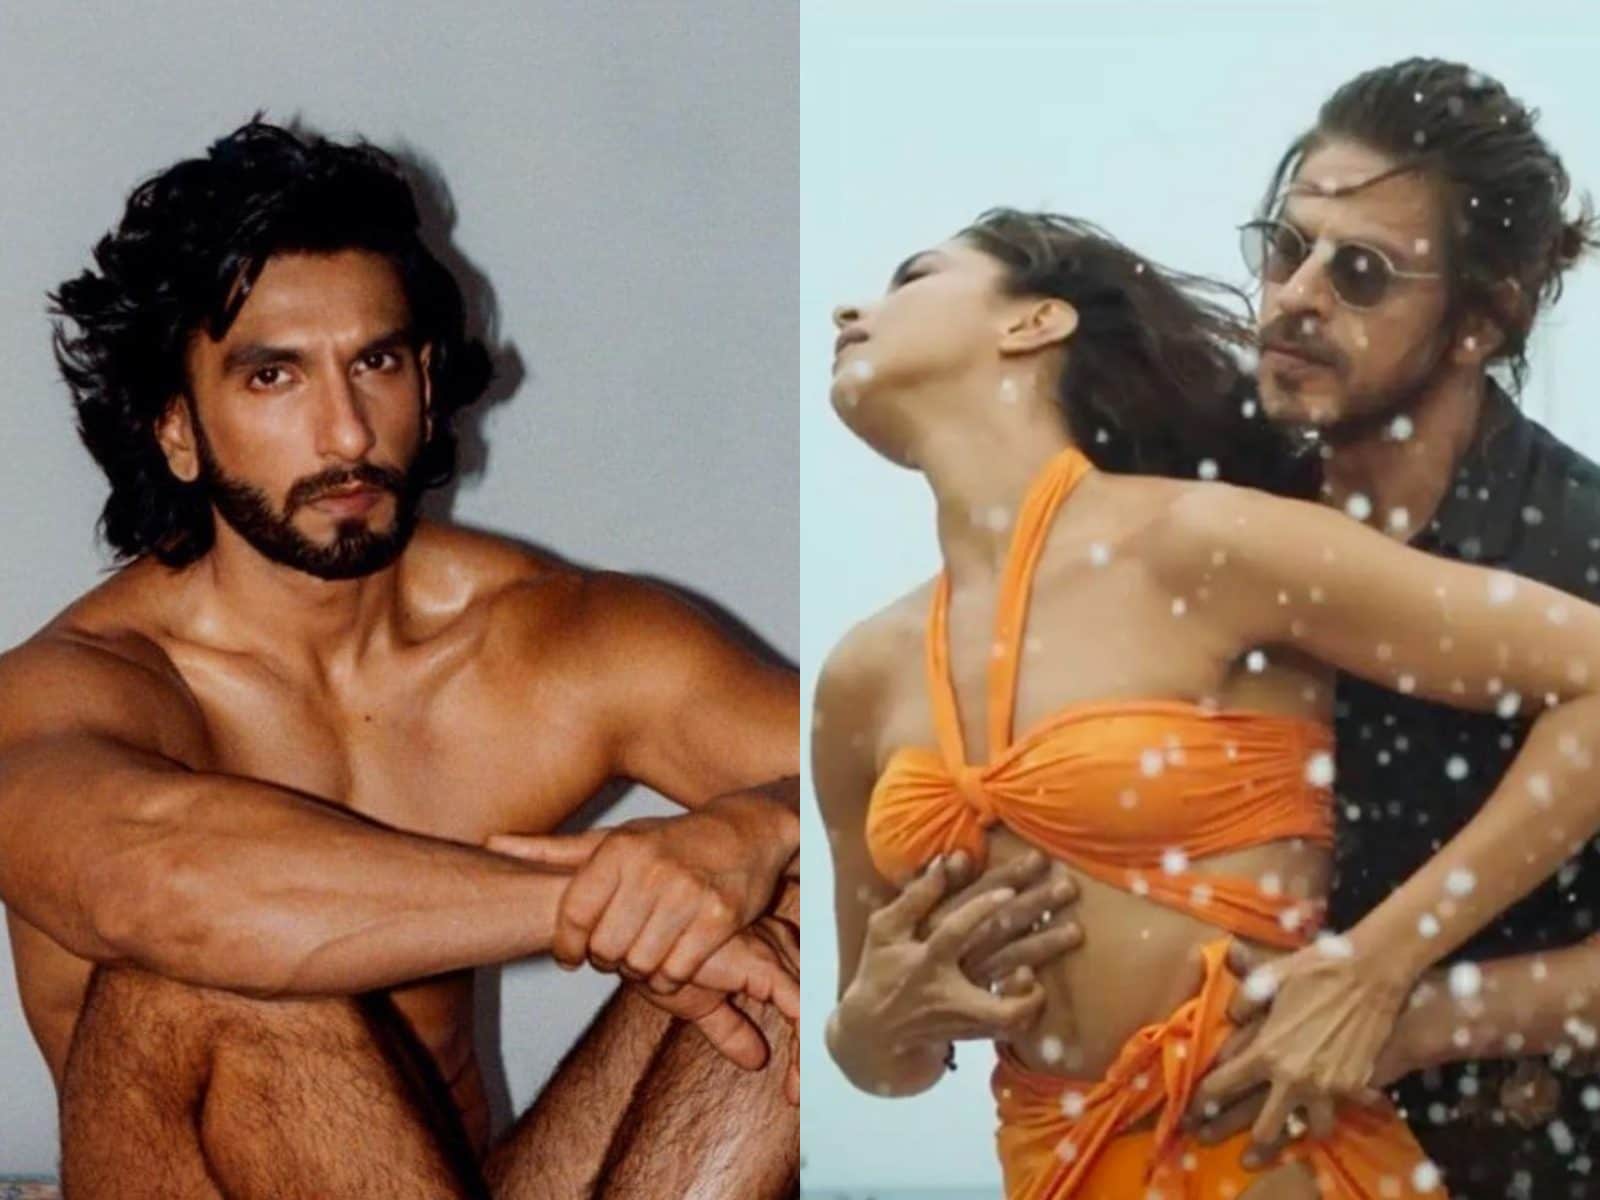 1600px x 1200px - Year Ender 2022: Deepika Padukone's Saffron Swimsuit in Besharam Rang to  Ranveer Singh's Nude Photoshoot, Bollywood's Biggest Controversies - News18